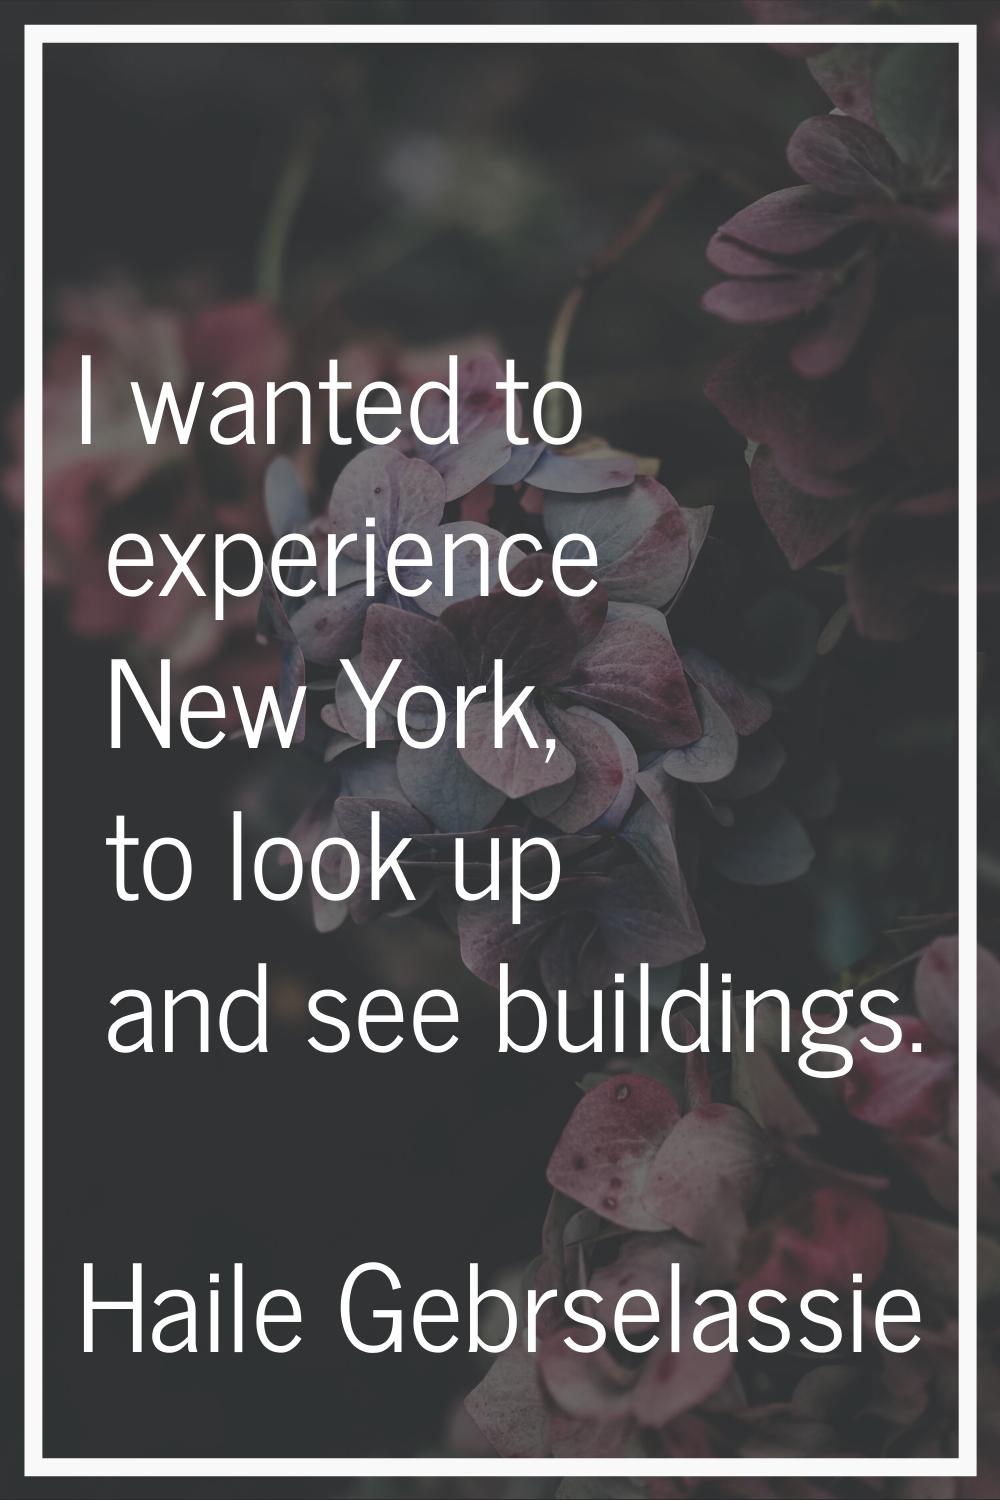 I wanted to experience New York, to look up and see buildings.